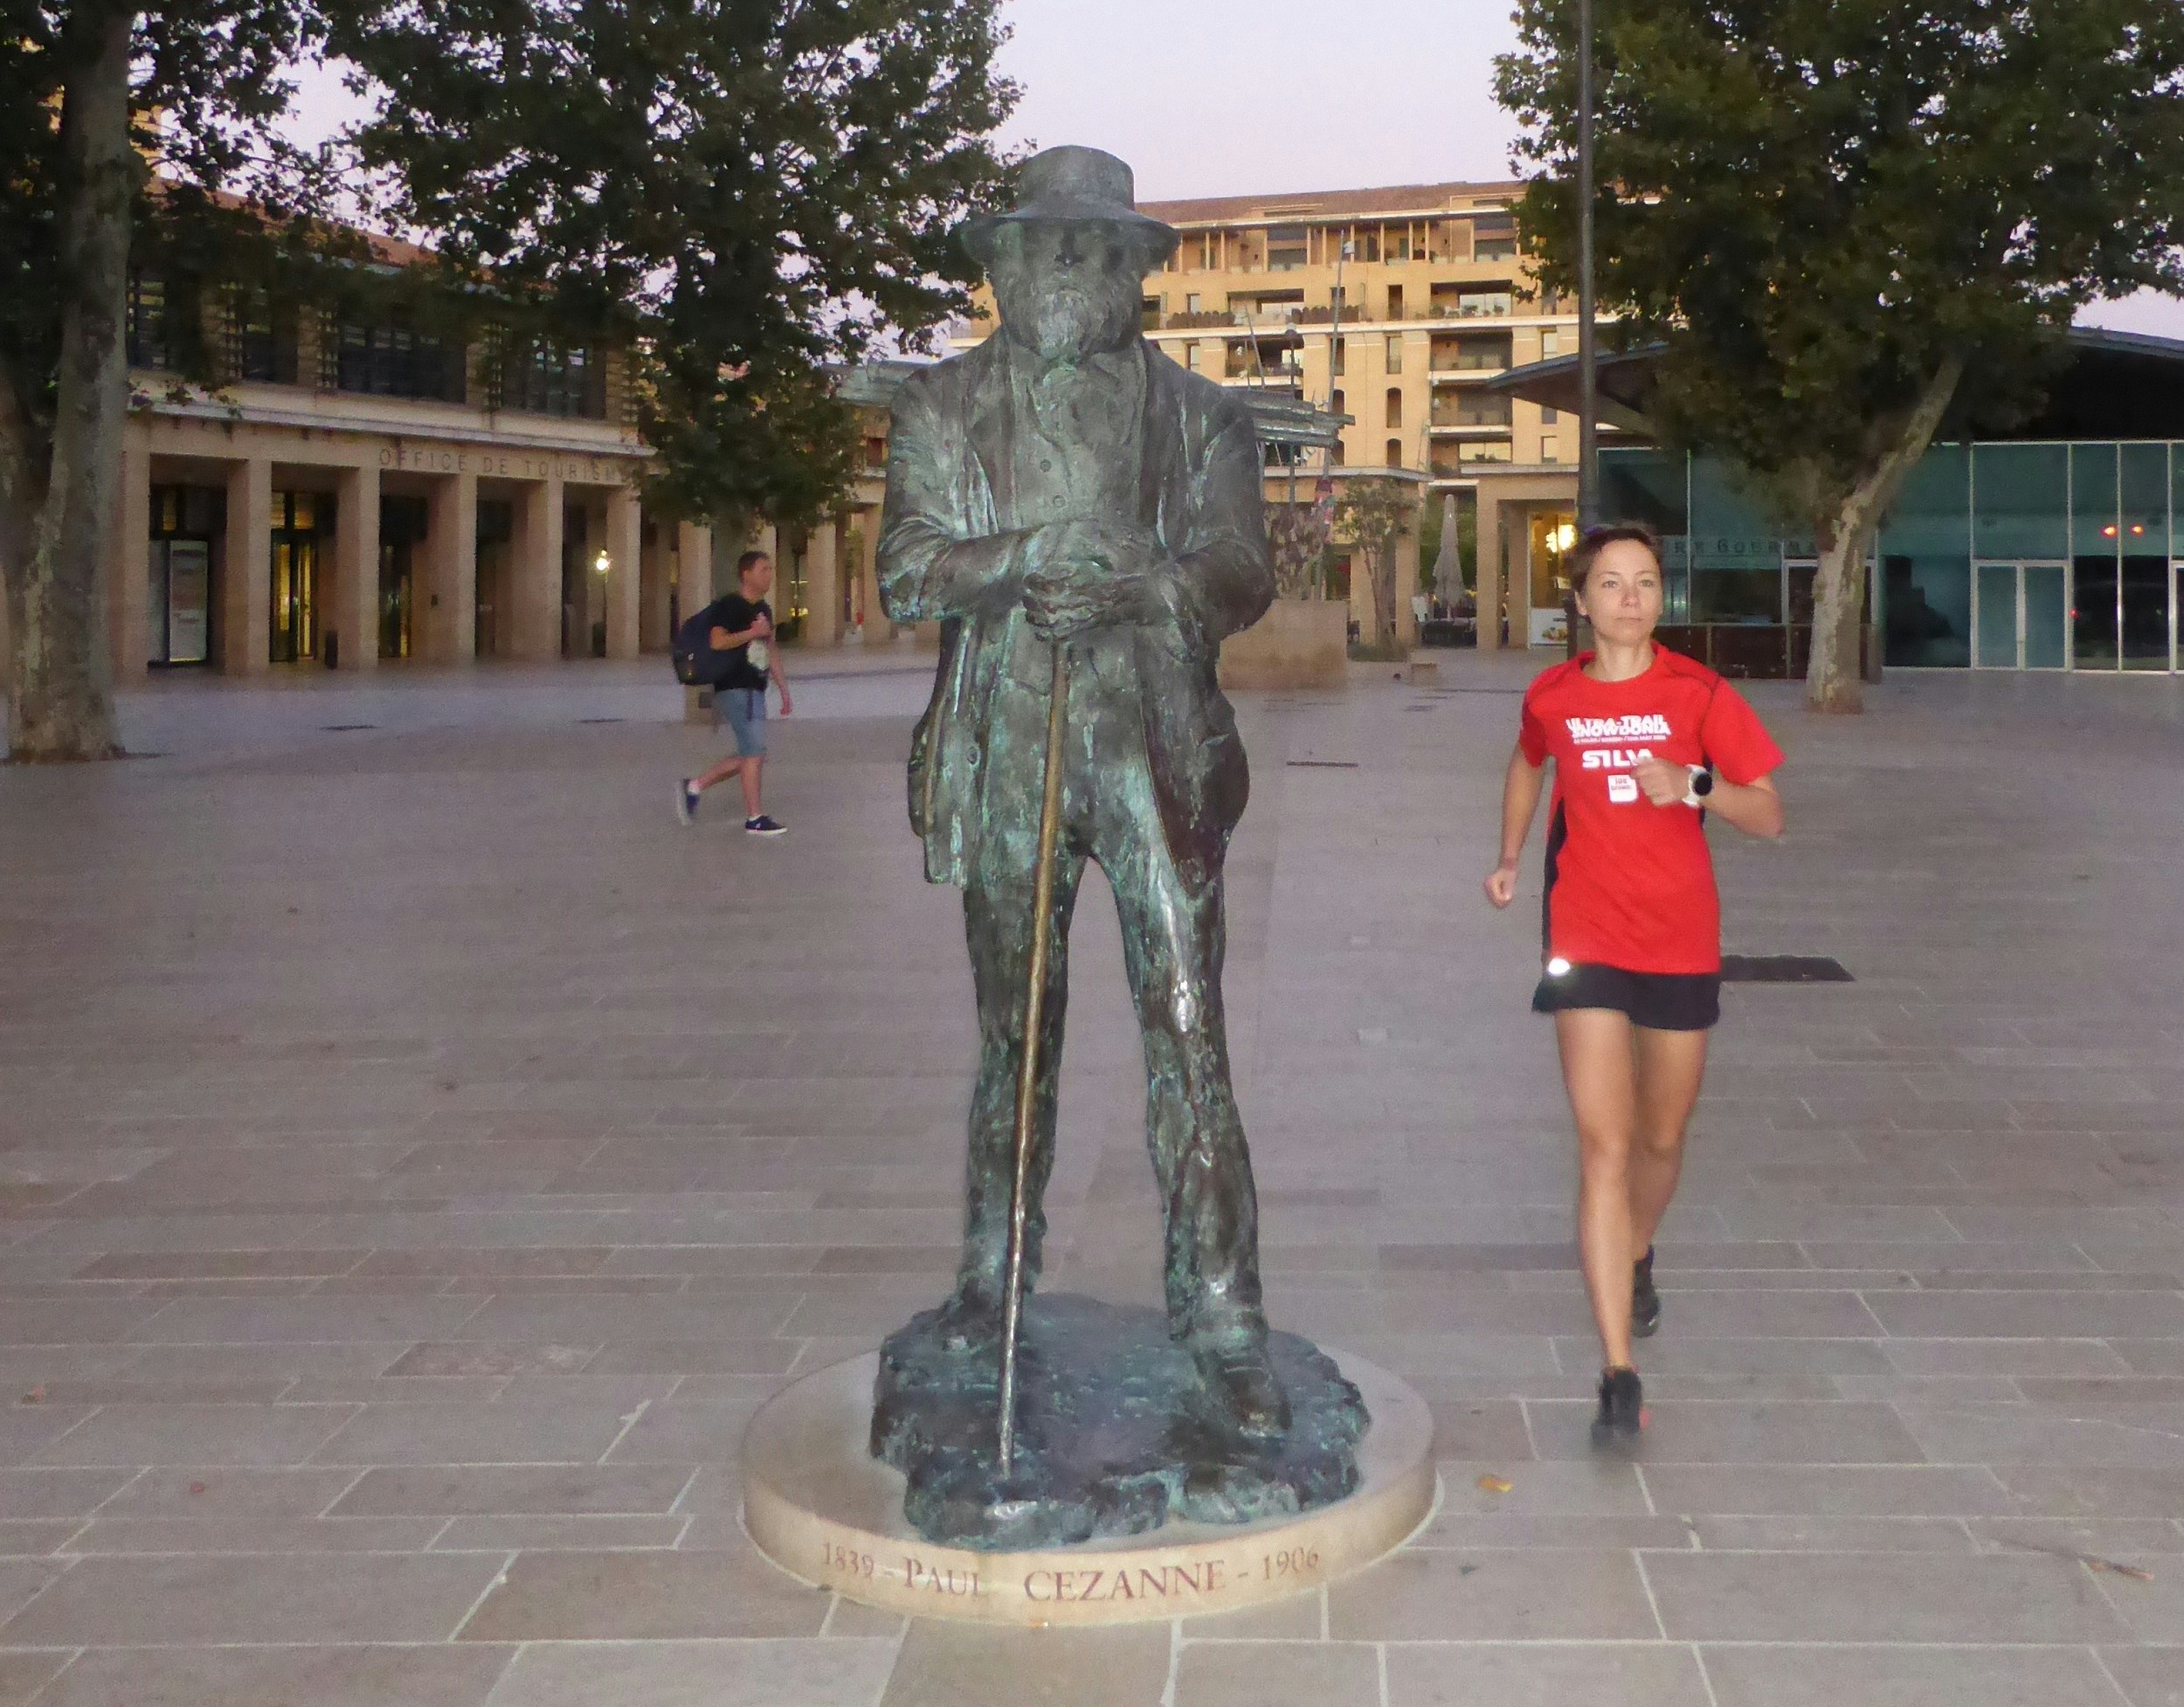 The writer runs towards the camera and past the Paul Cézanne statue.